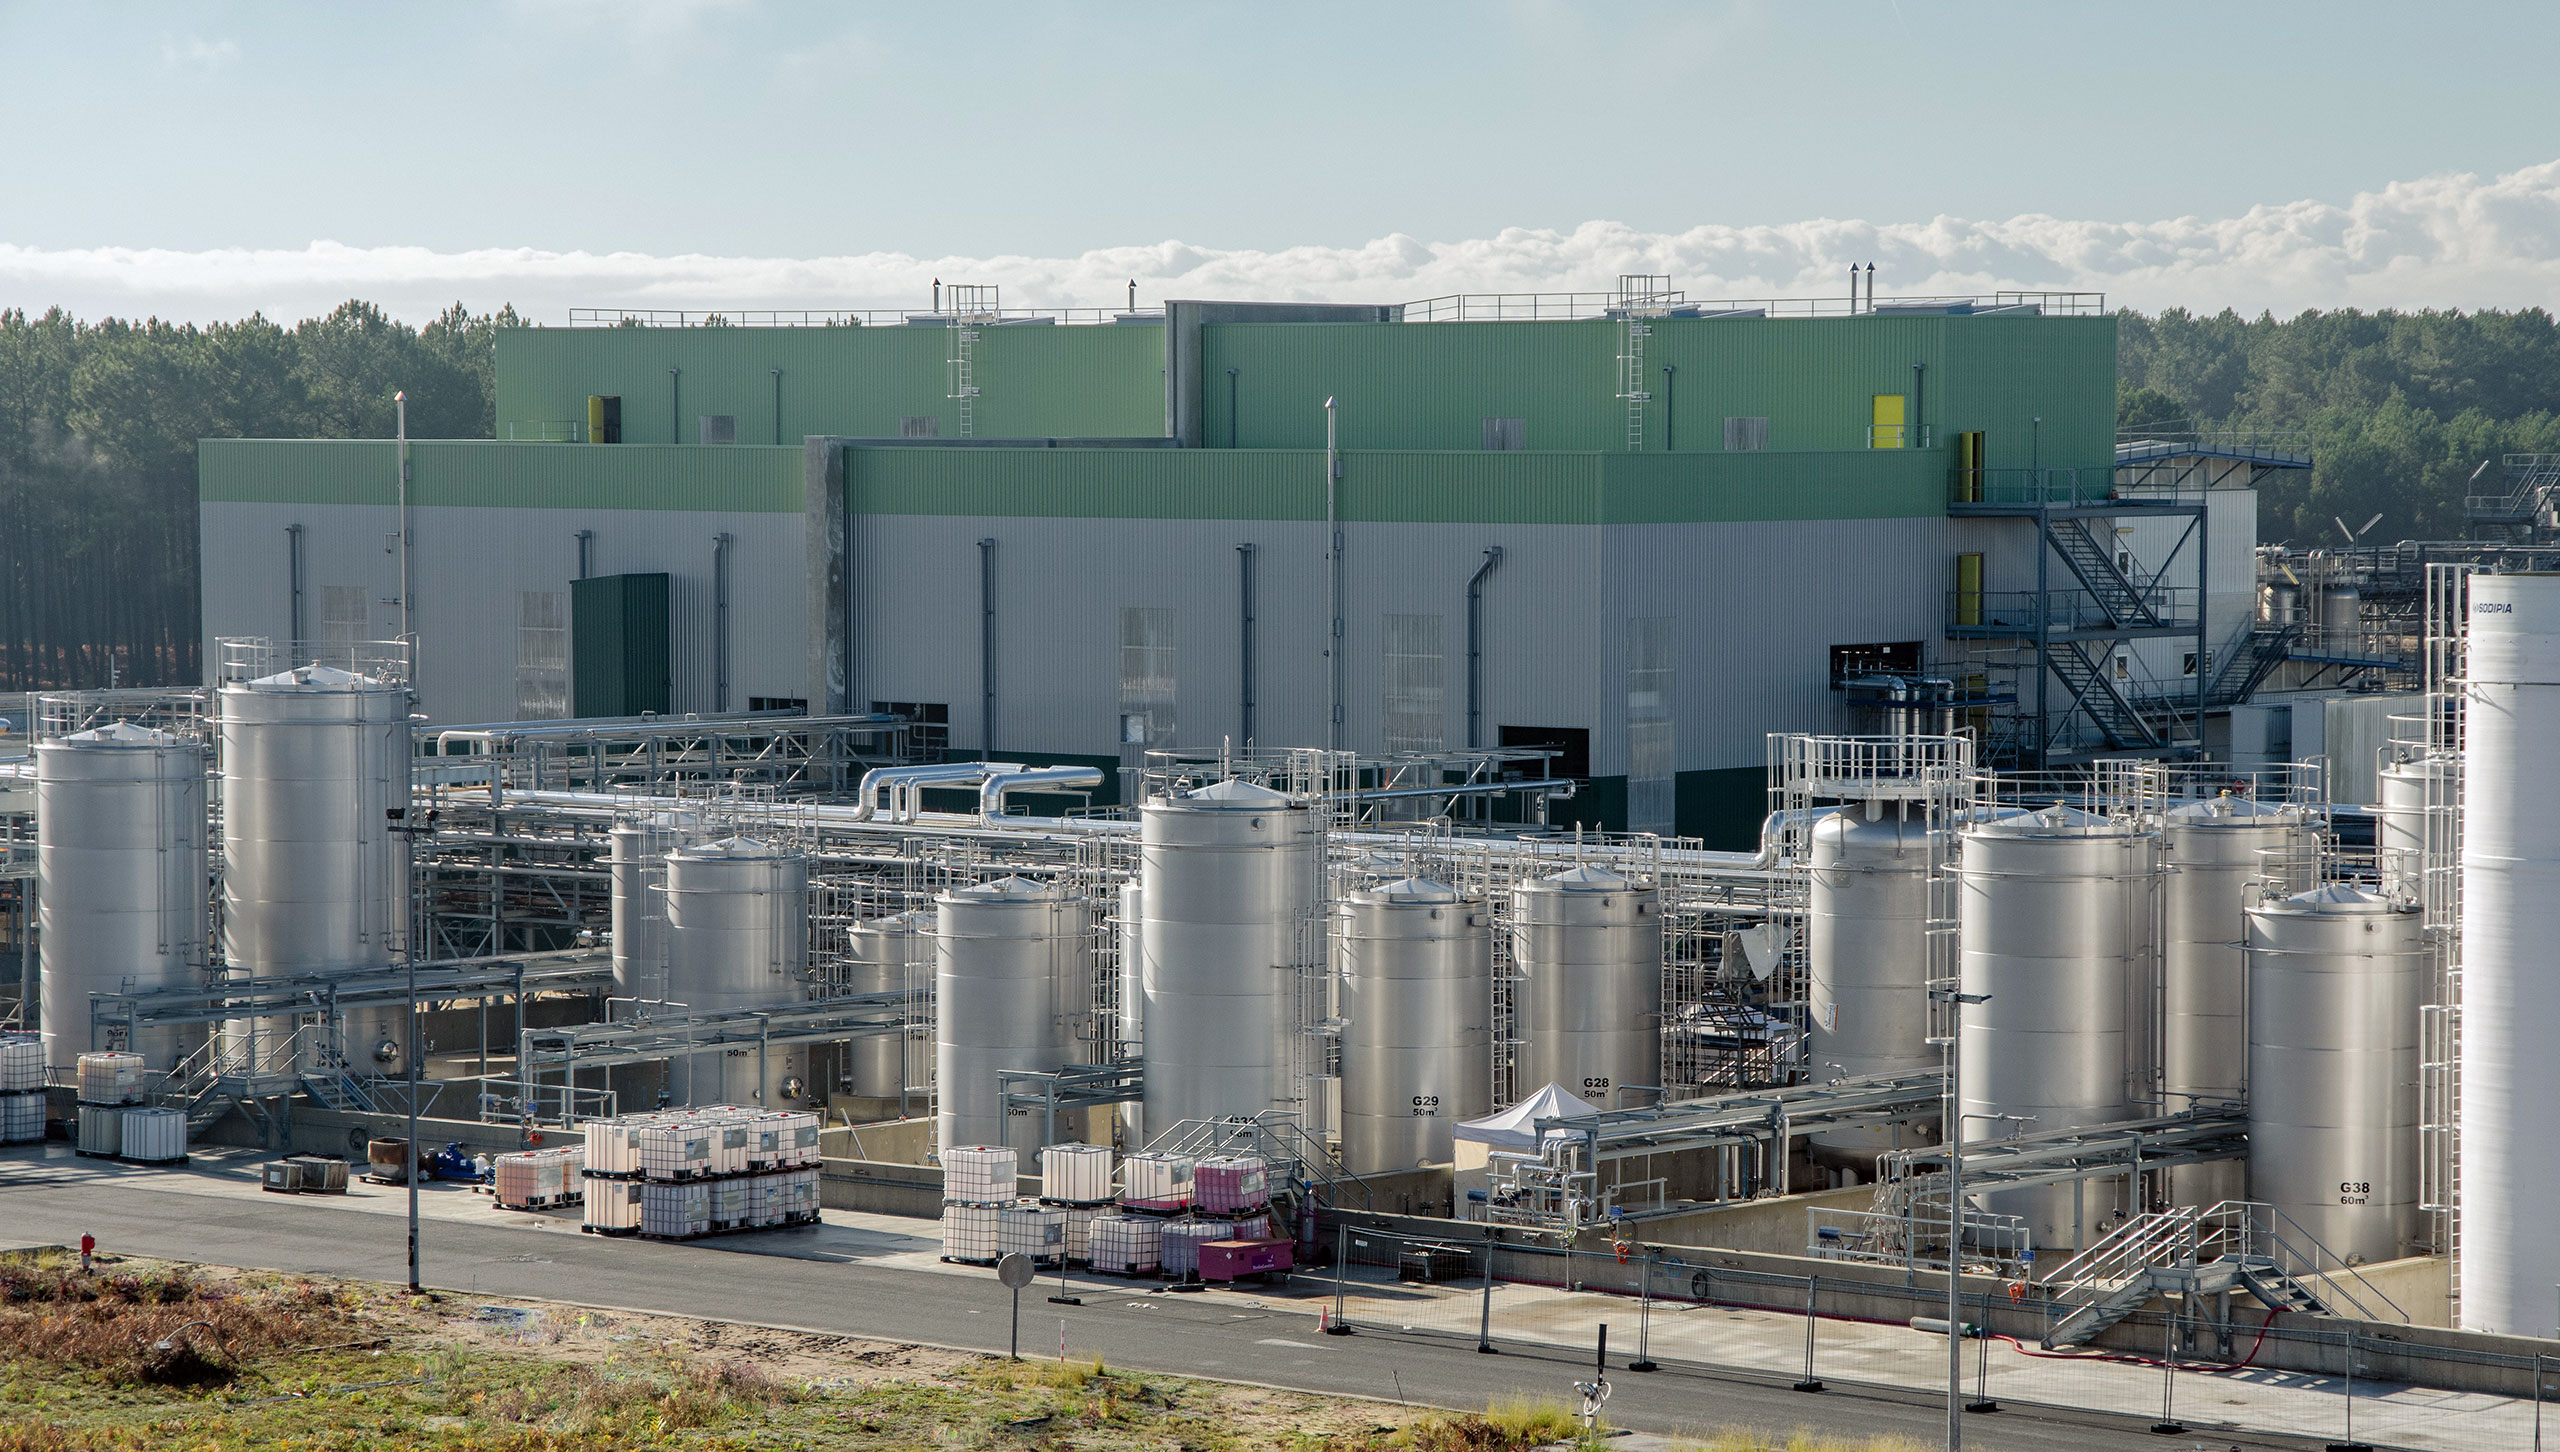 Commissioning of a New Plant to Increase Production Capacity for Renewable Ingredients in Europe